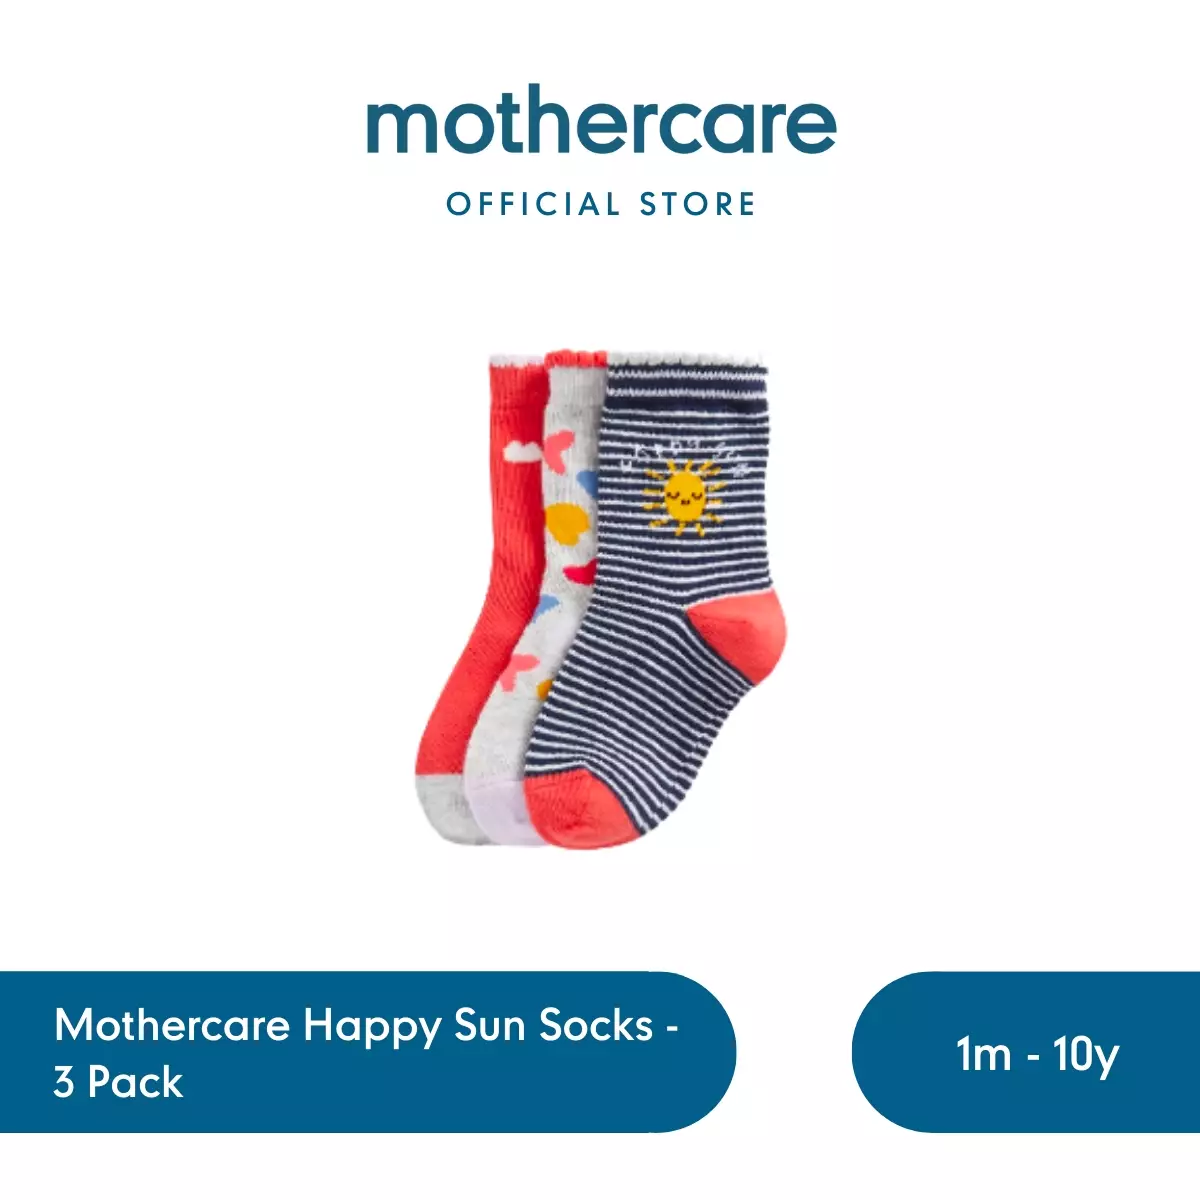 Mothercare heritage striped bodysuit, shorts and socks set - Mothercare